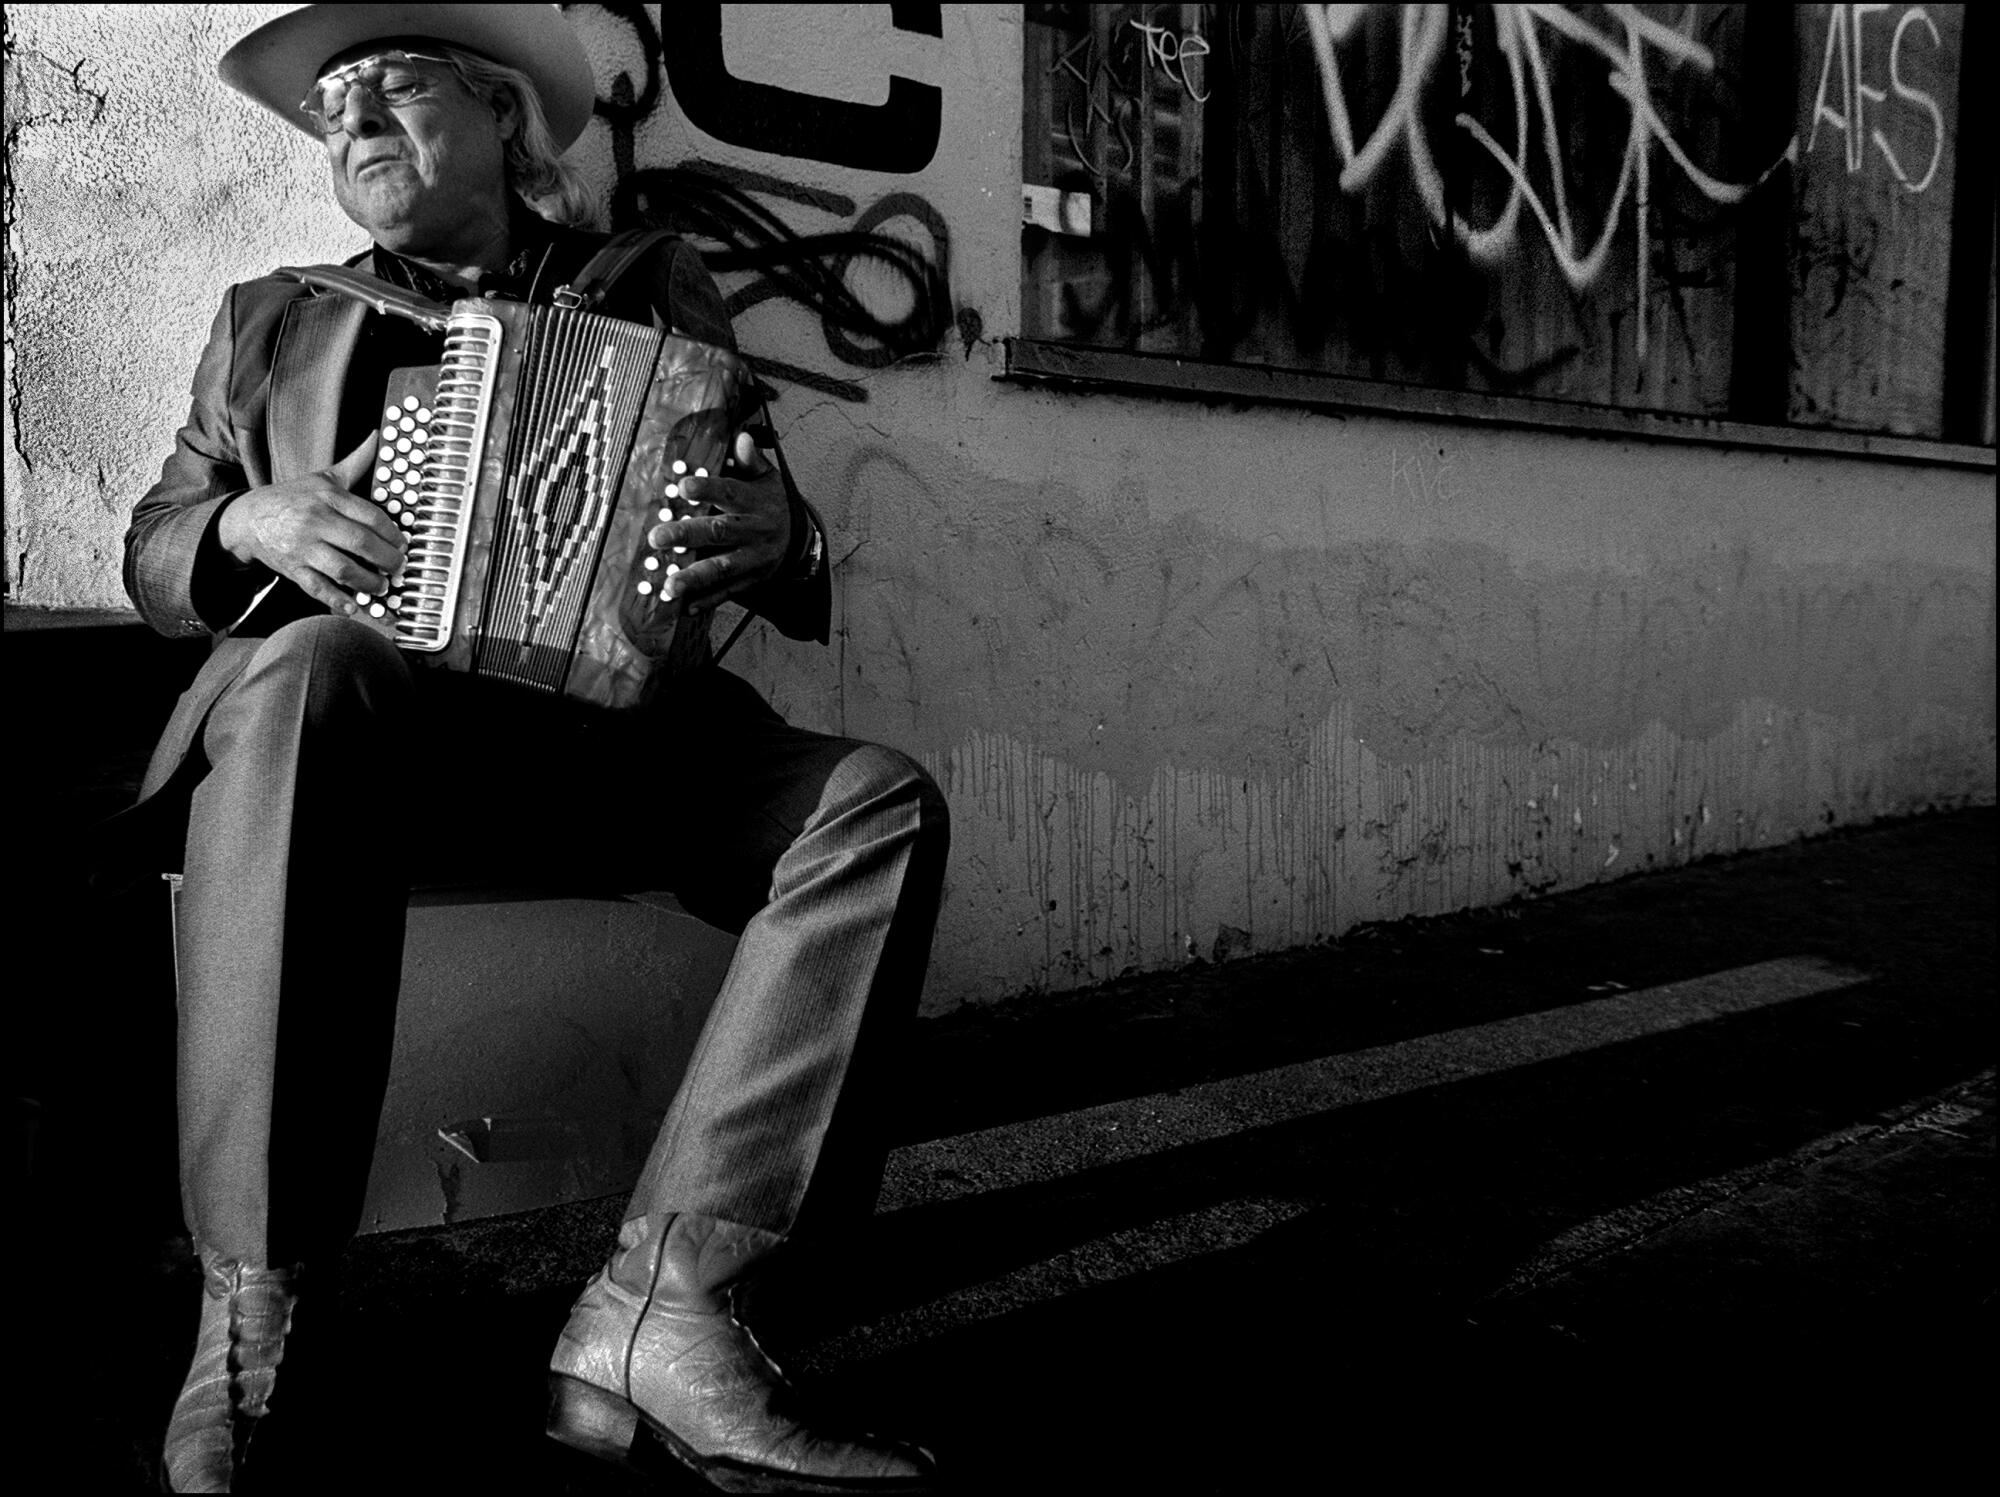 Antonio Hernandez, in cowboy hat, sits on a step against a graffitied wall with his accordion in his lap.